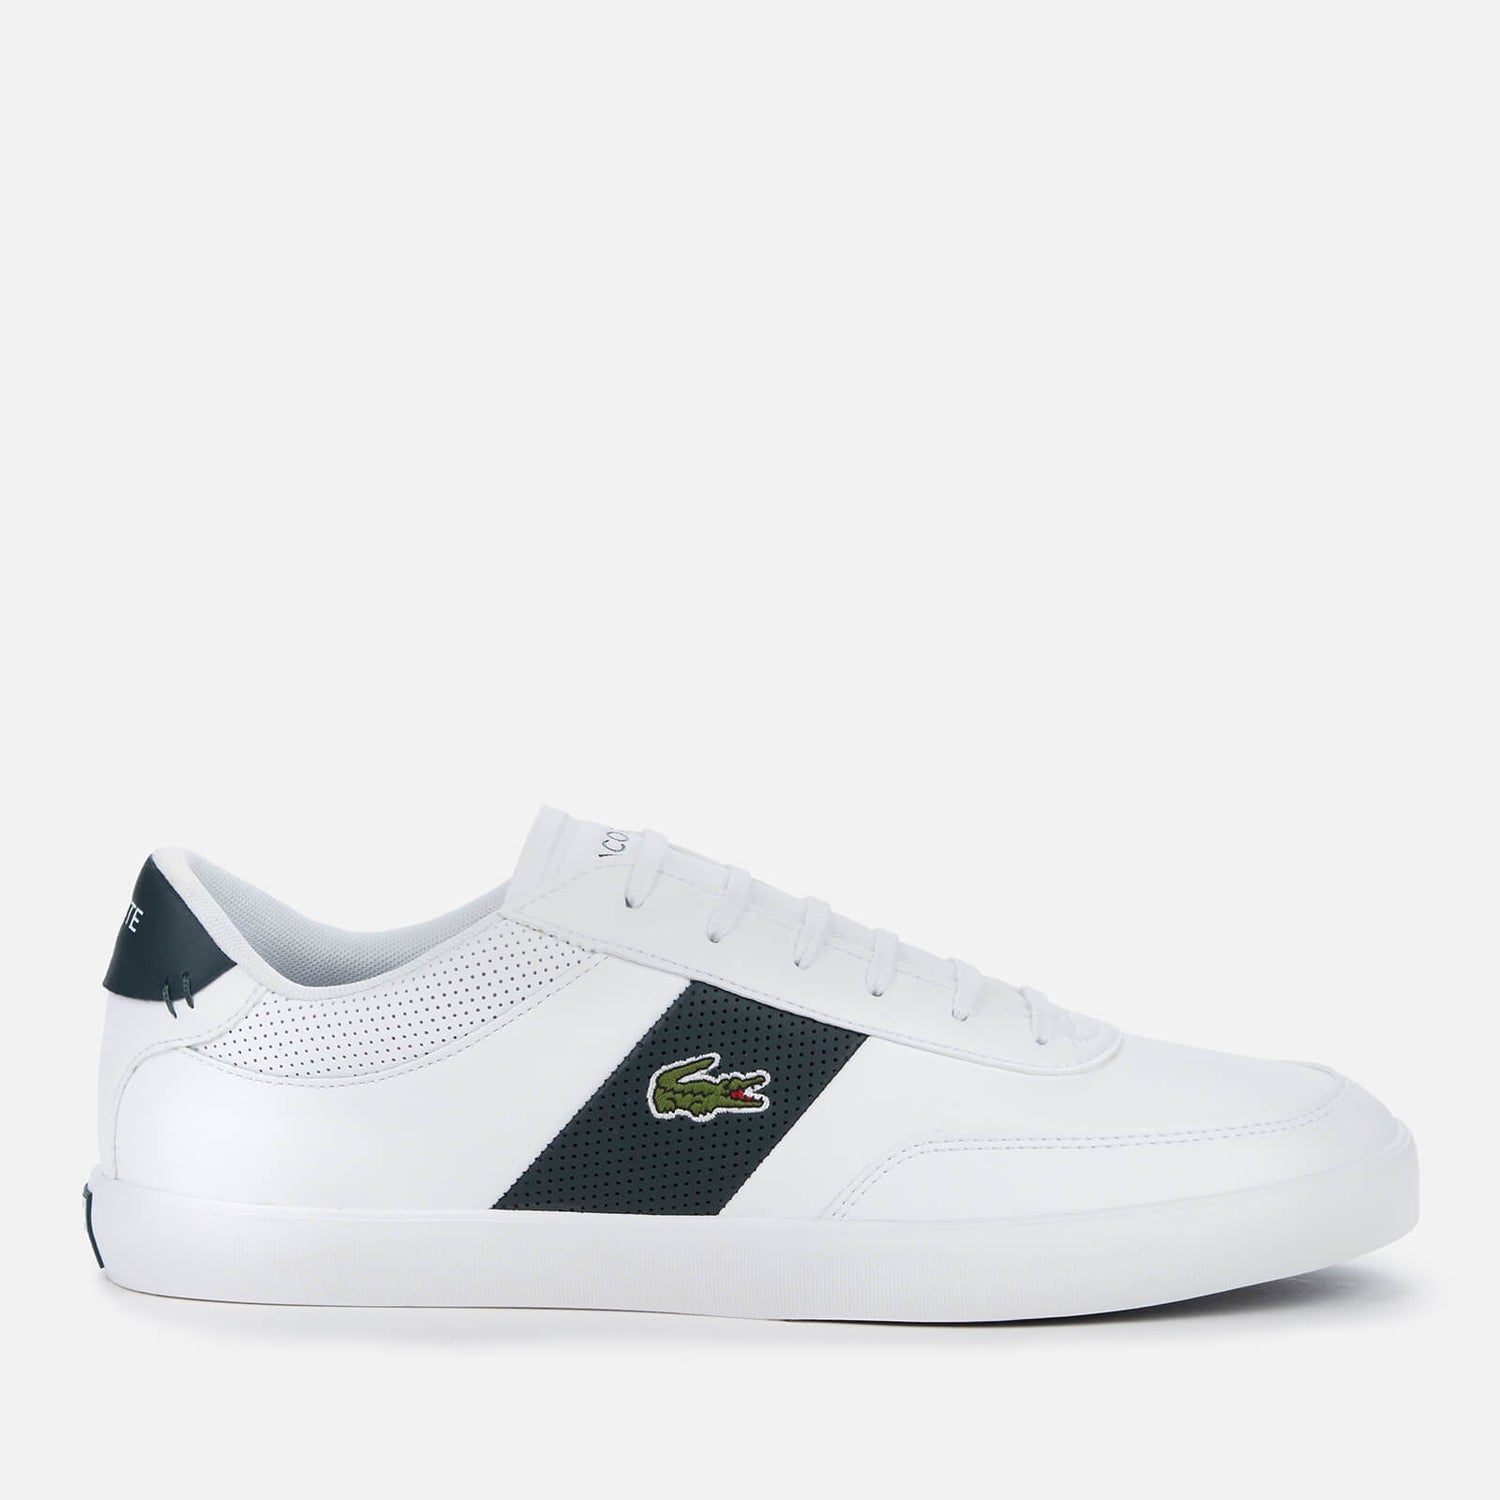 Lacoste Men's Court-Master 0120 1 Leather Vulcanised Trainers - White/Dark Green